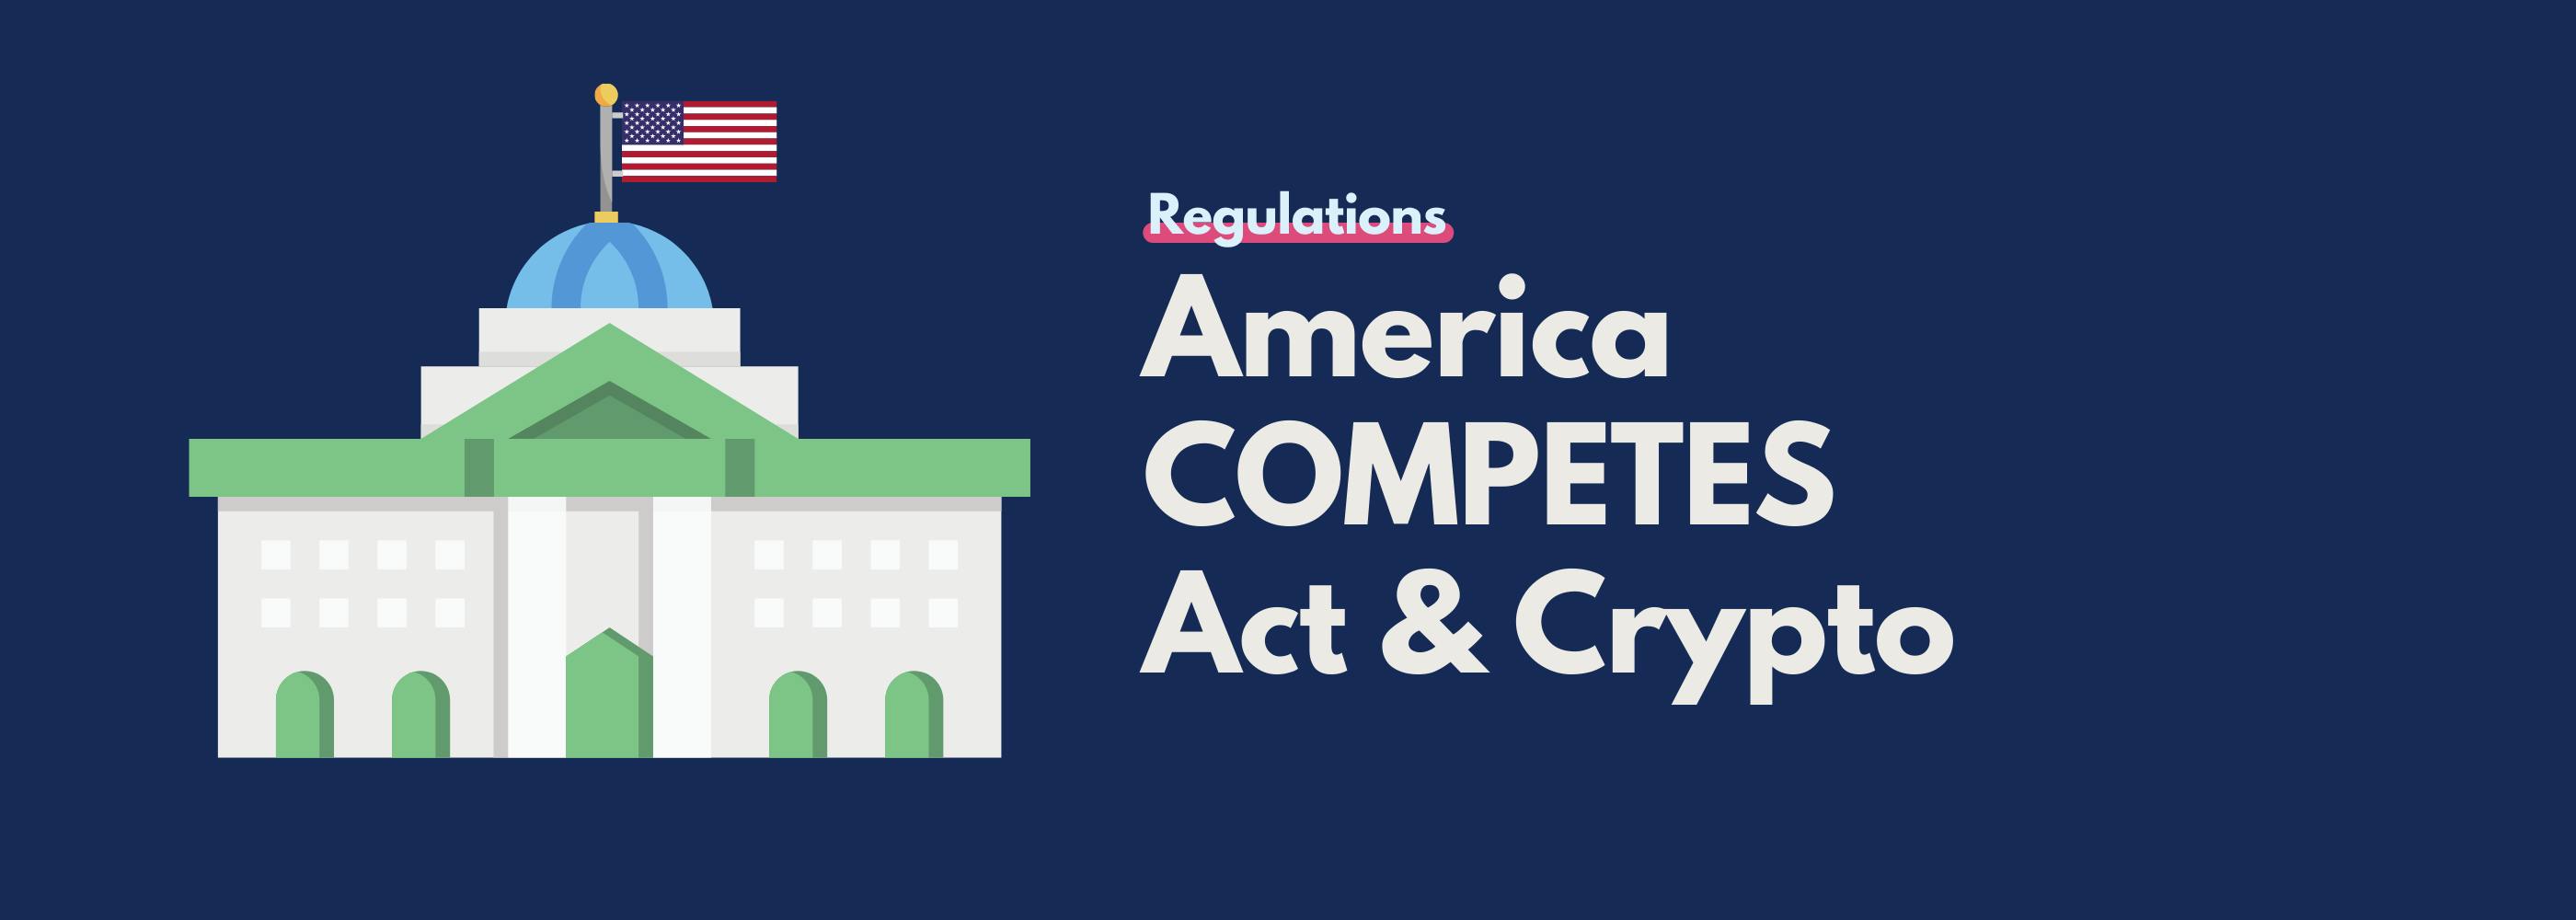 America COMPETES Act & Crypto